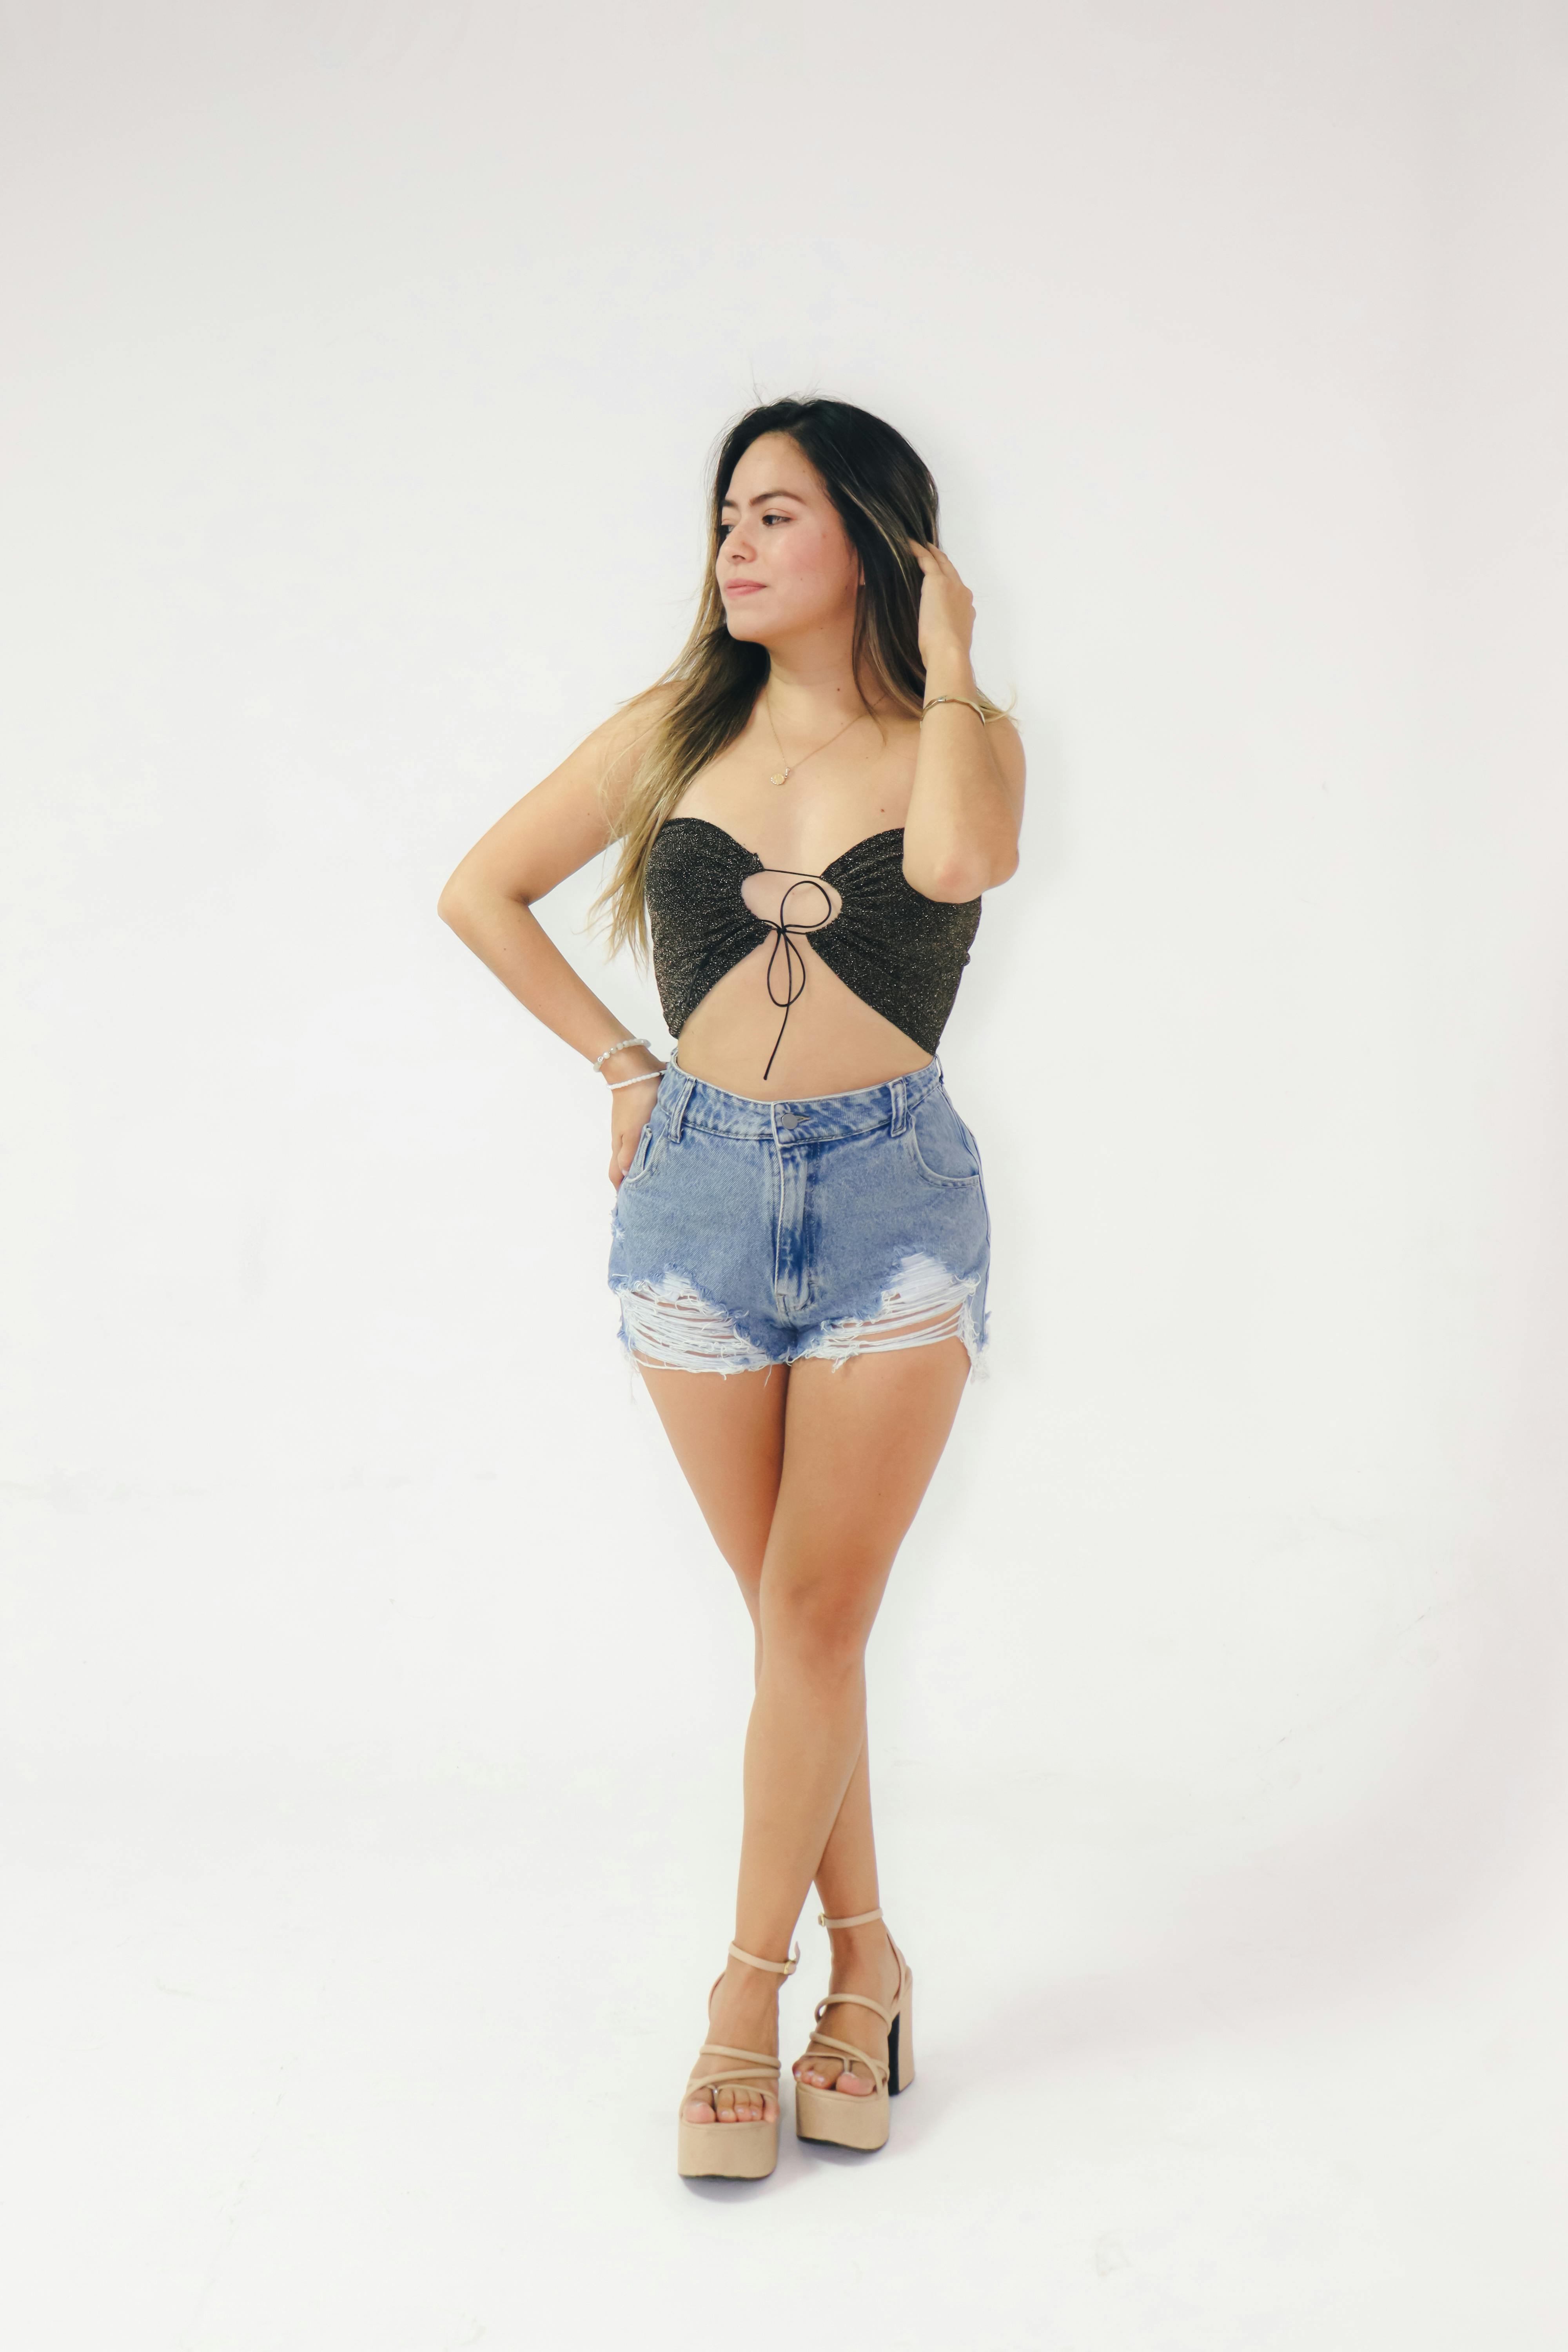 A woman in denim shorts and a bra top · Free Stock Photo